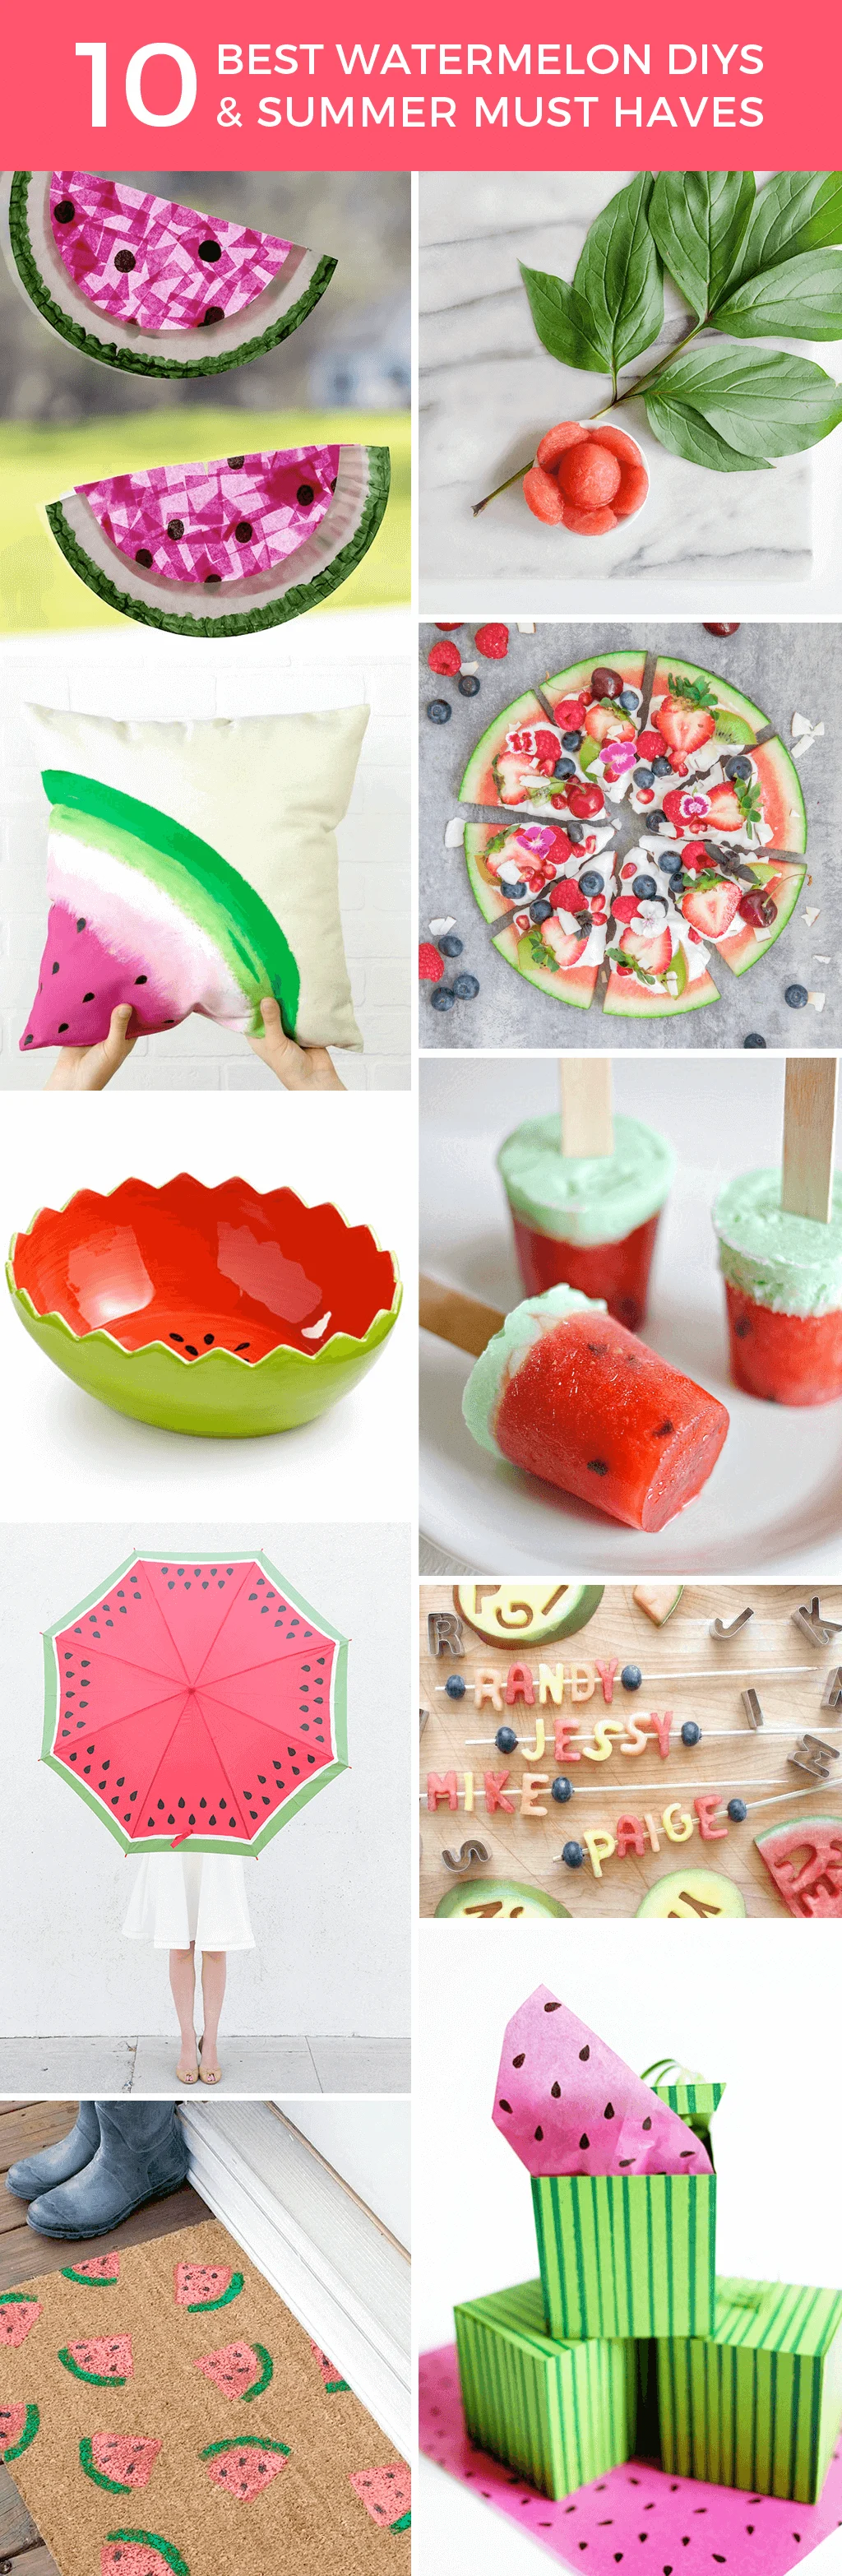 10 Best Watermelon DIYs and Summer Must Haves